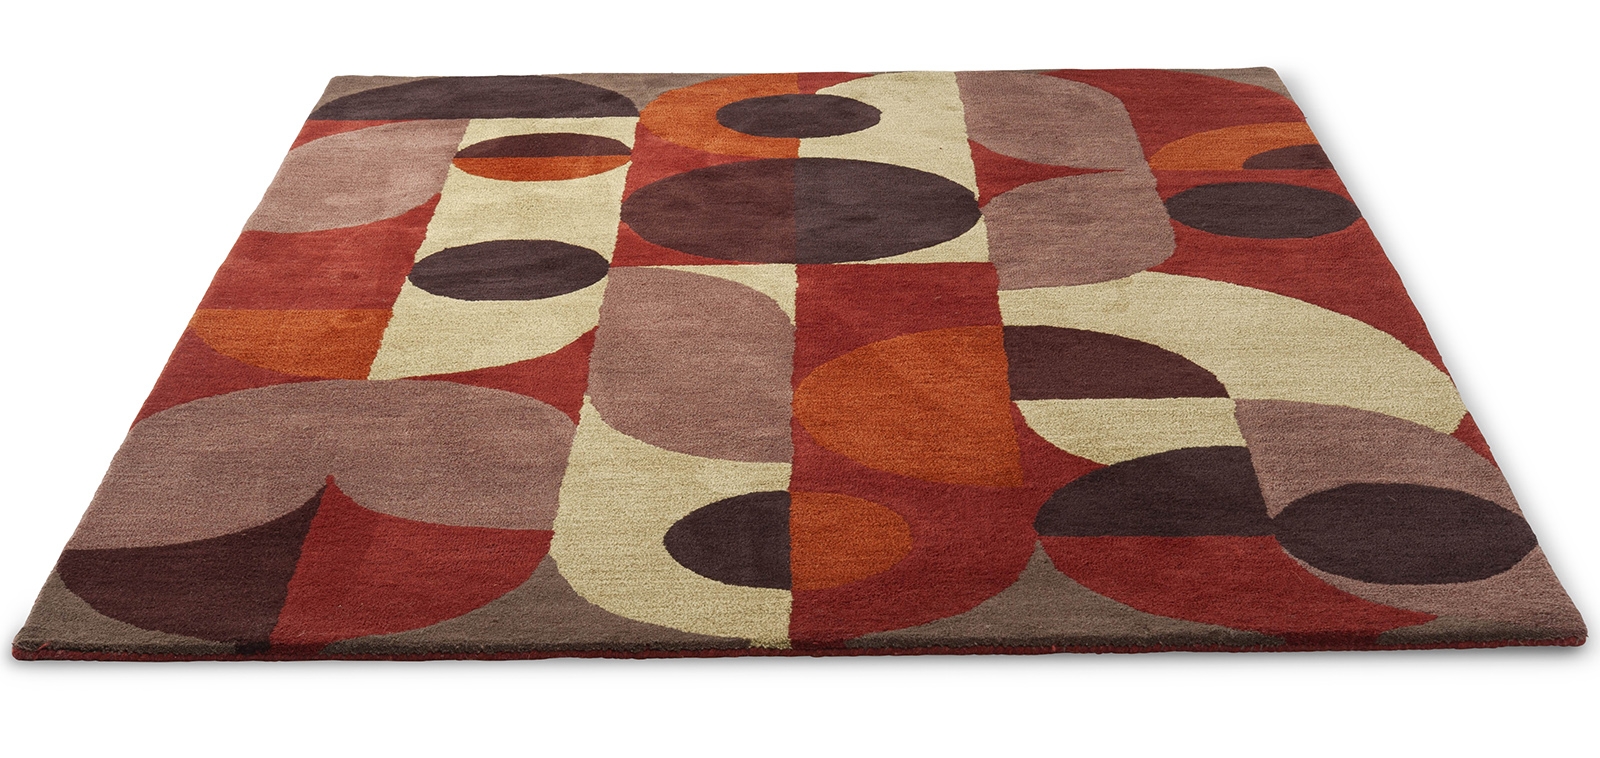 Decor Red Pale Rug ☞ Size: 250 x 350 cm